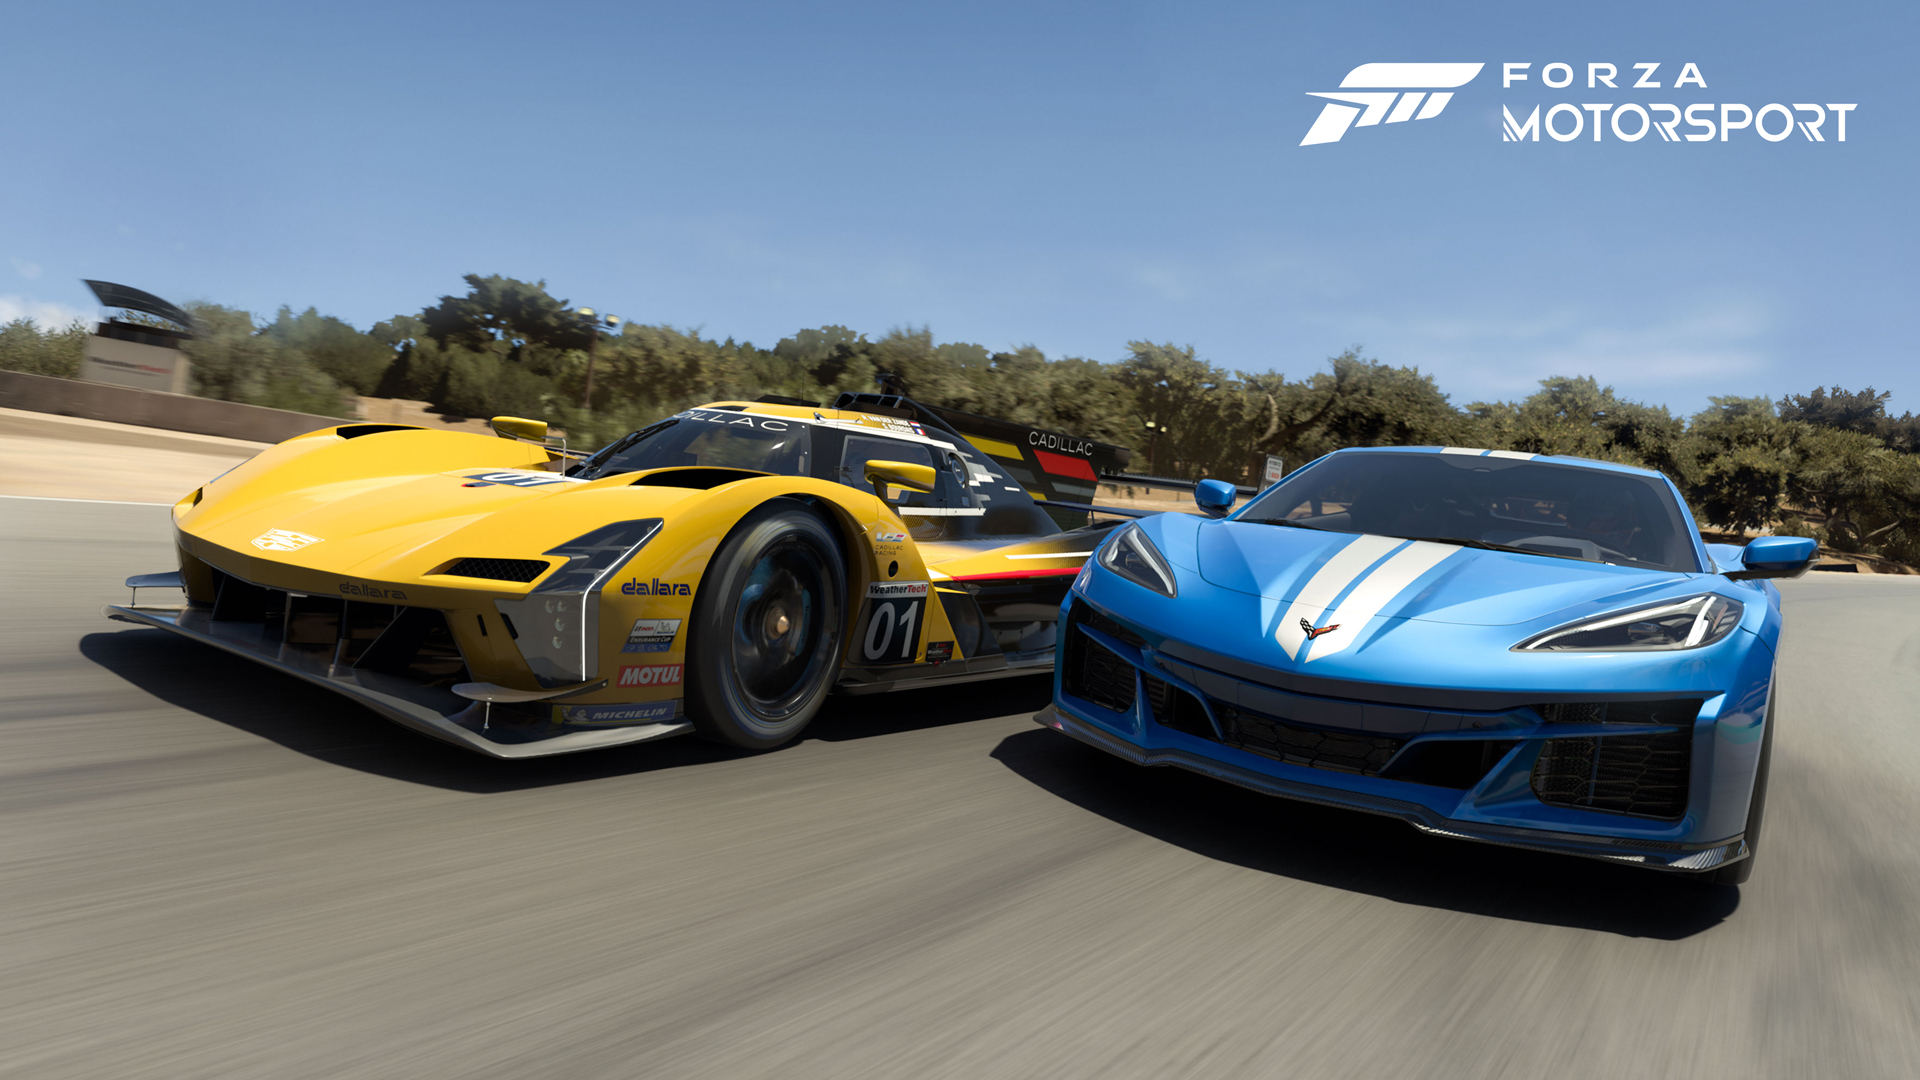 First impressions: Should you buy Gran Turismo 7 on PlayStation 4?